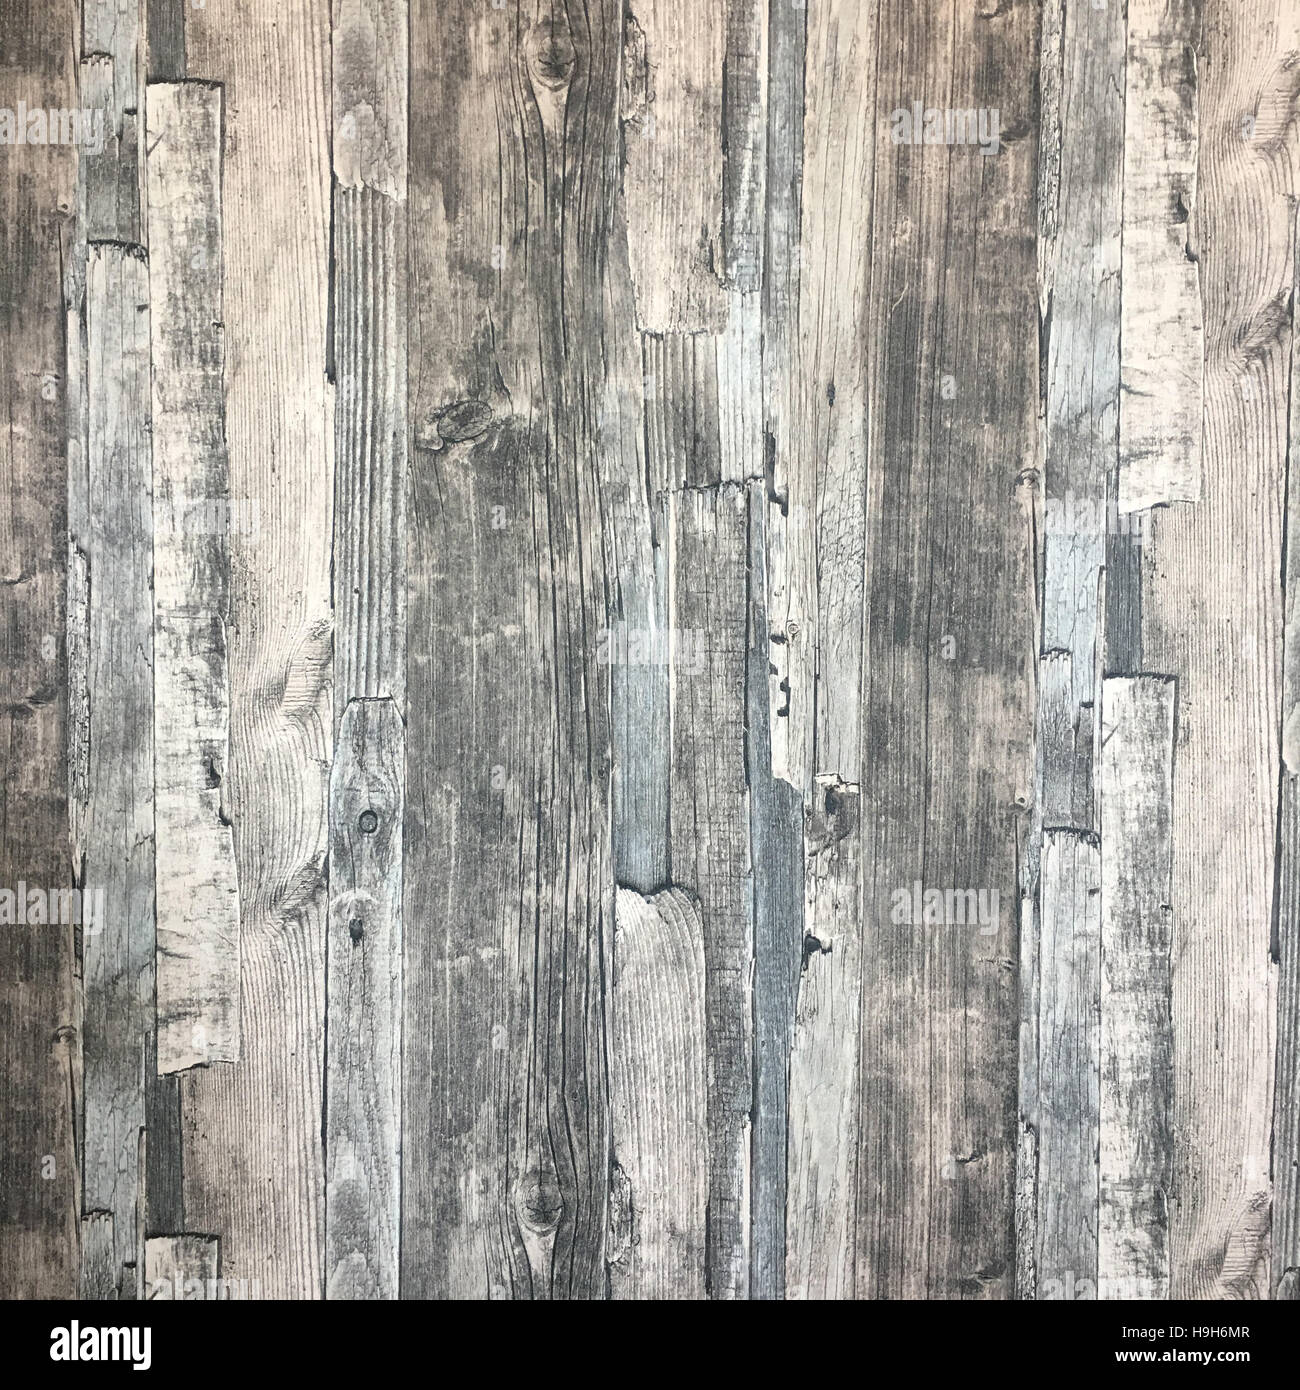 wood, background, texture, dark, wooden, plank, old, close, brown, vintage, grunge, surface, board, natural, table, barn, wall, up, abstract, backdrop, textured, structure, panel, rough, timber, grungy, nature, color, pattern, tree Stock Photo